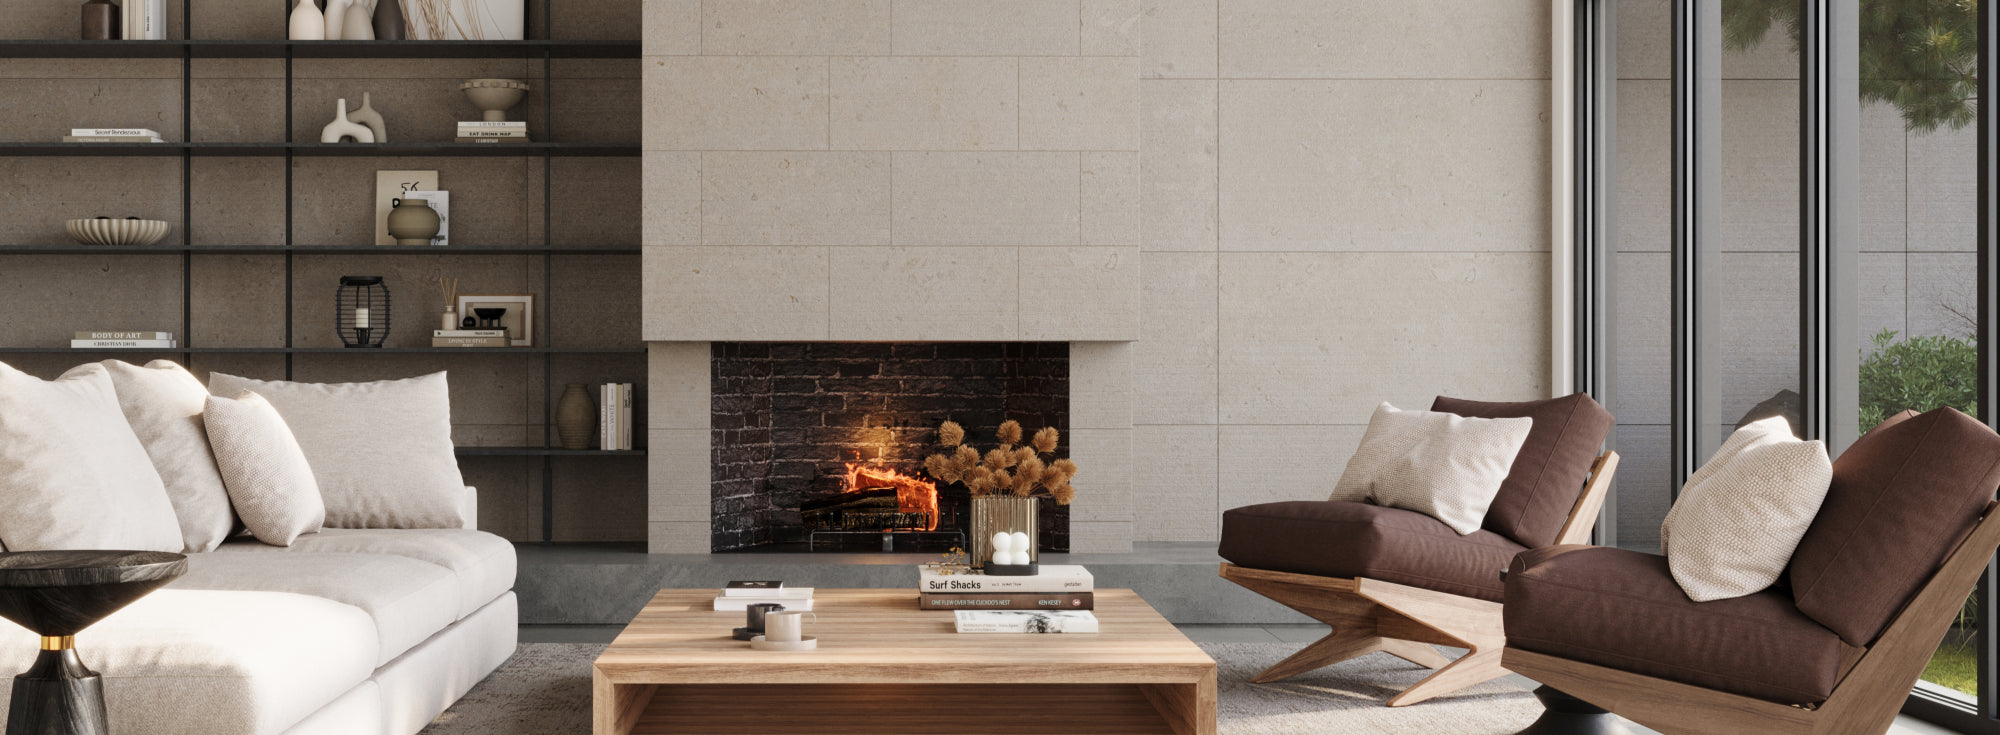 Contemporary living space adorned with wall tiles, adding texture and elegance for a chic, modern ambiance. 